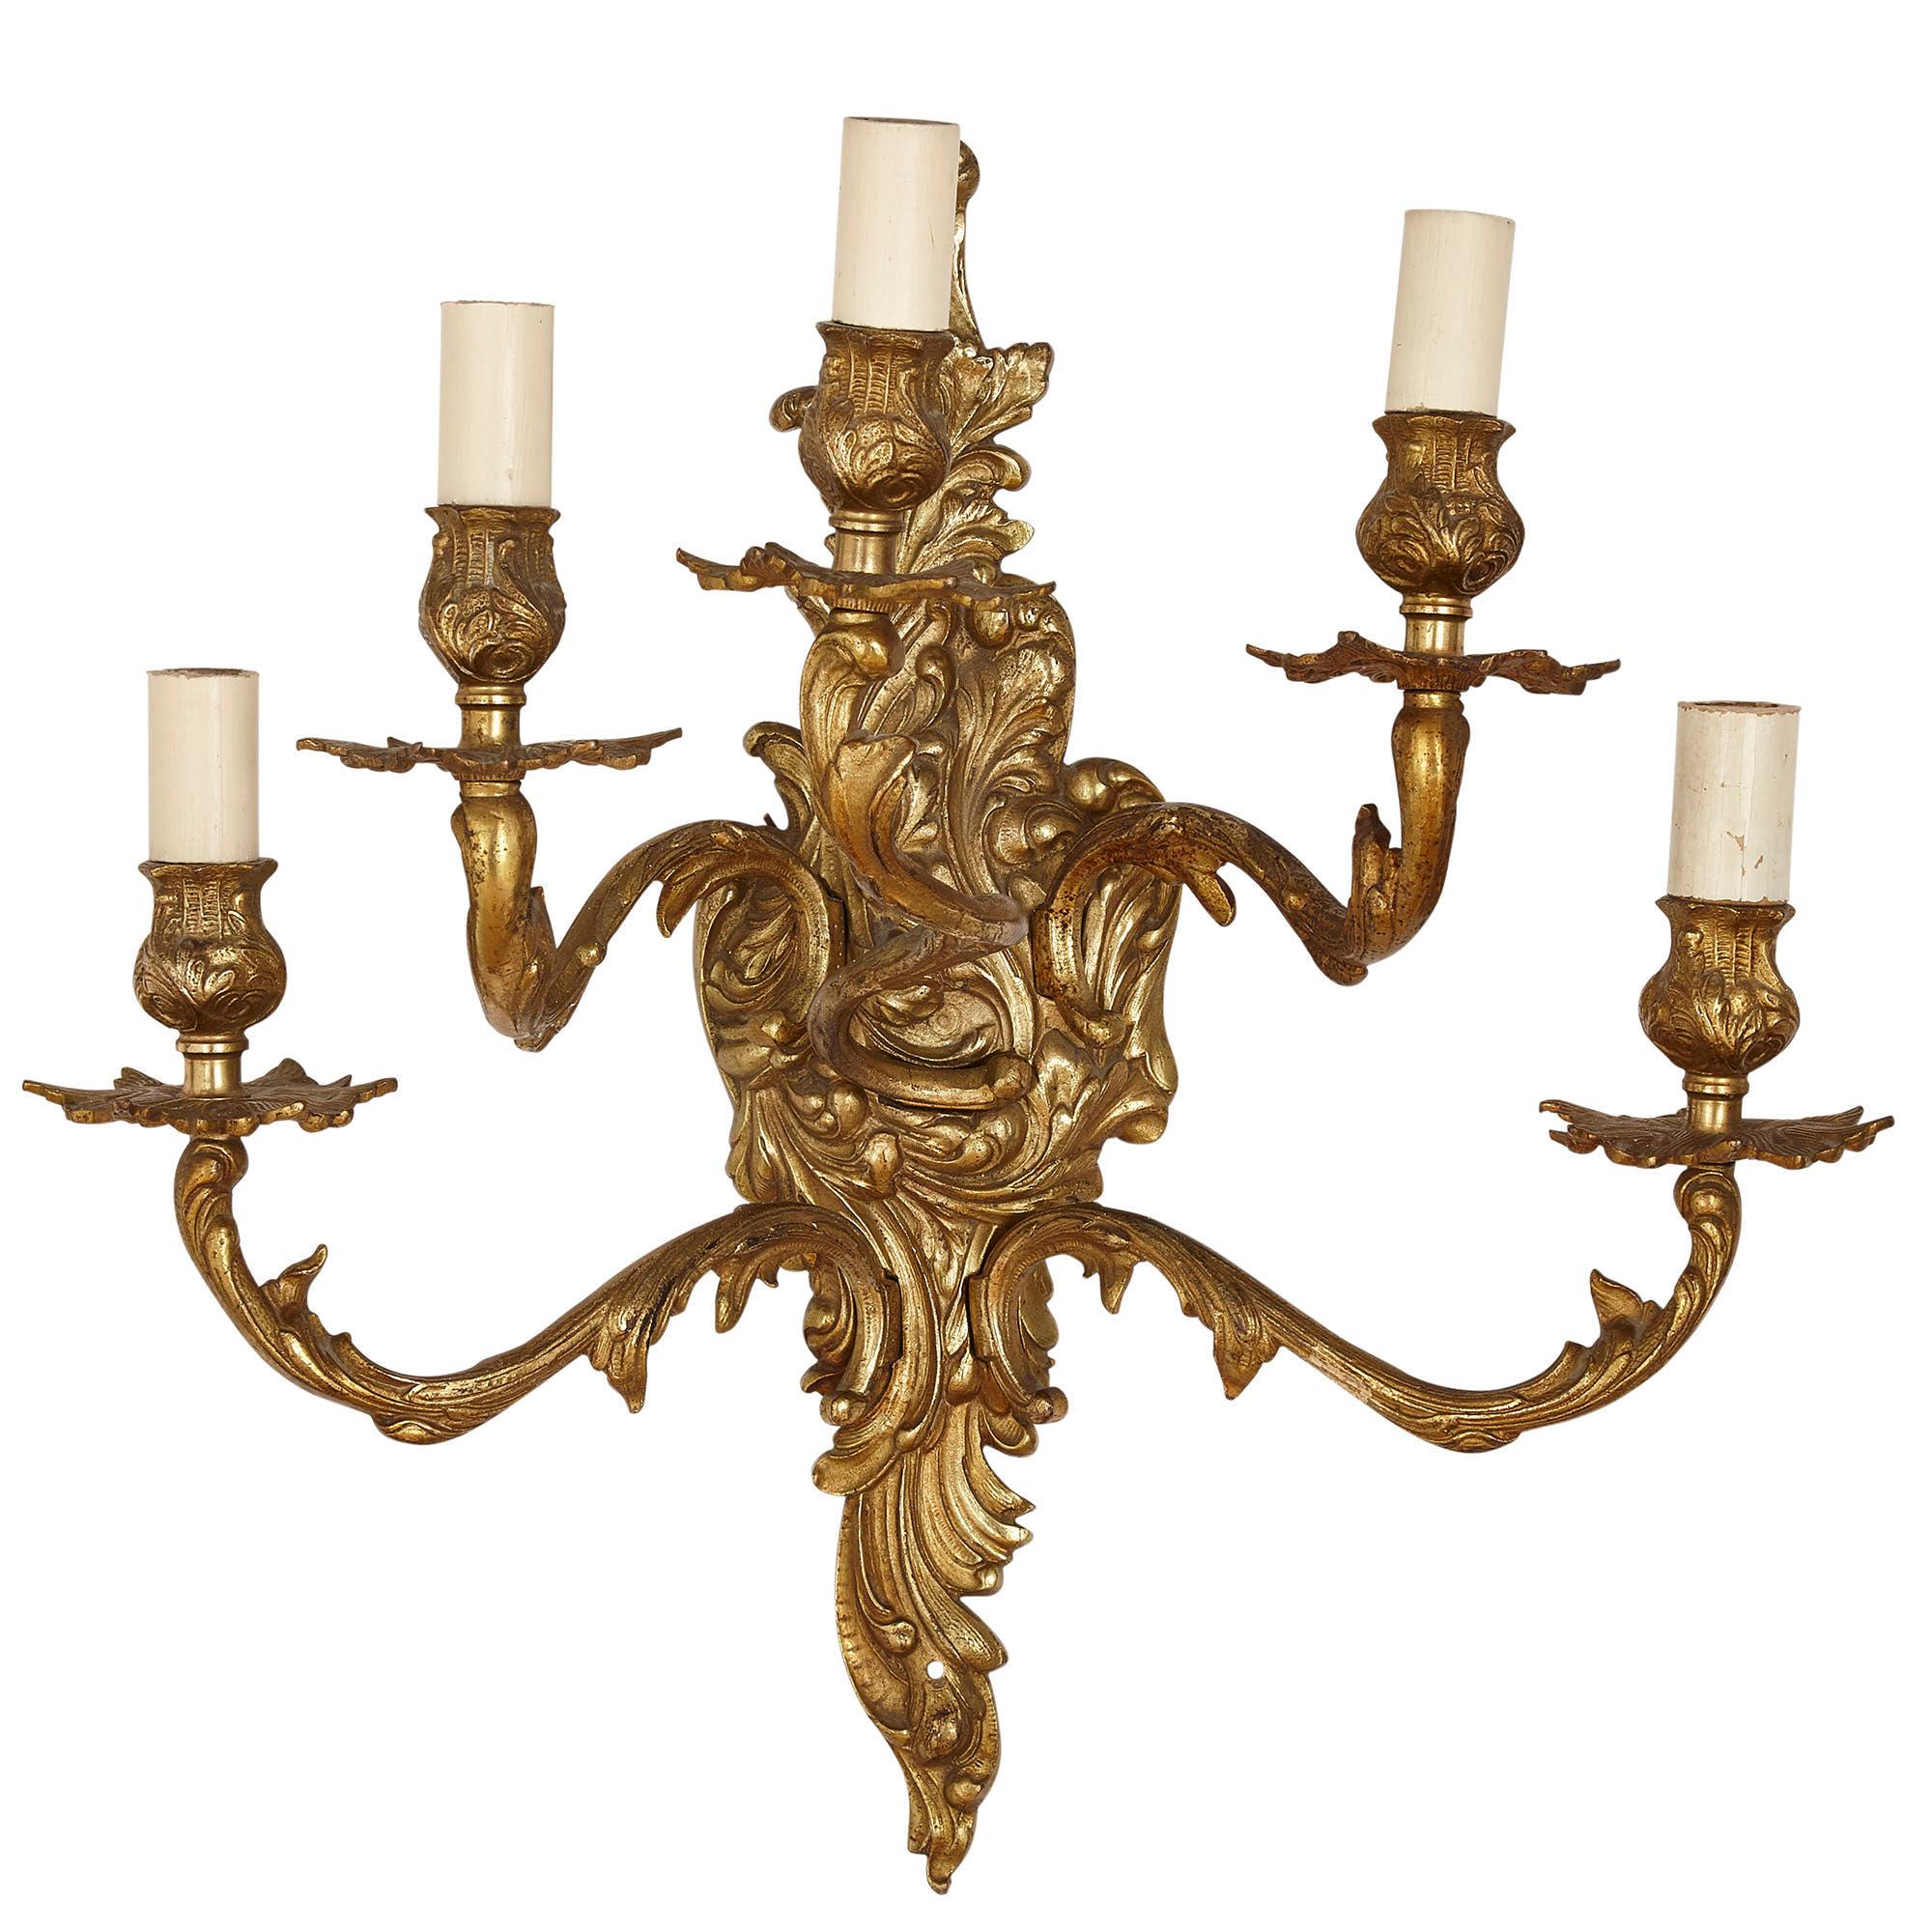 Set of three gilt bronze sconces in the Baroque style
French, early 20th century
Measures: Height 48cm, width 49cm, depth 26cm

The sconces in this set are wrought from gilt bronze in the Baroque style. Each sconce features an acanthus leaf